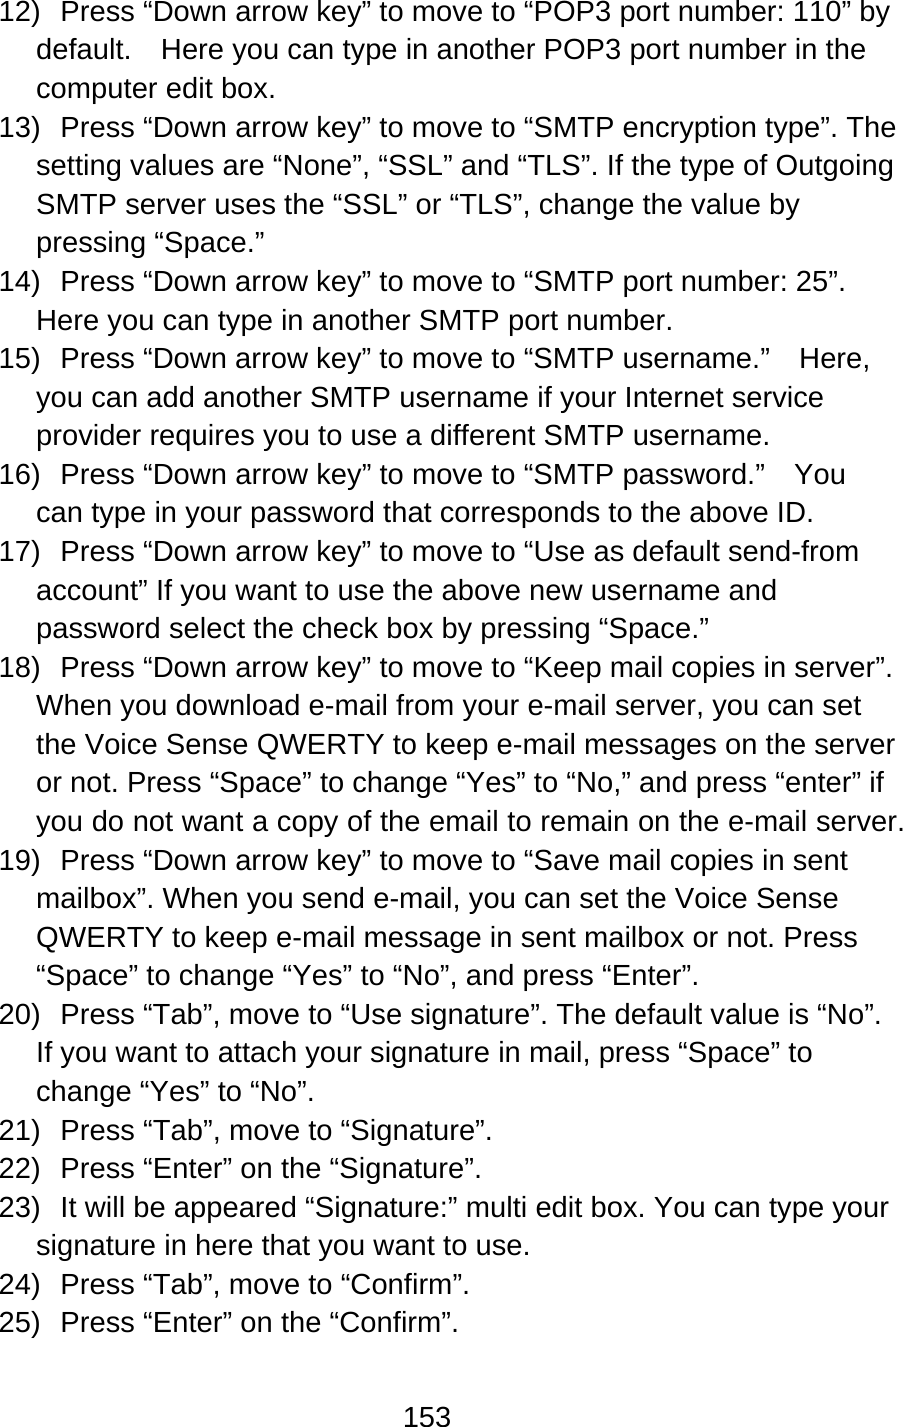 153  12)  Press “Down arrow key” to move to “POP3 port number: 110” by default.    Here you can type in another POP3 port number in the computer edit box. 13)  Press “Down arrow key” to move to “SMTP encryption type”. The setting values are “None”, “SSL” and “TLS”. If the type of Outgoing SMTP server uses the “SSL” or “TLS”, change the value by pressing “Space.” 14)  Press “Down arrow key” to move to “SMTP port number: 25”. Here you can type in another SMTP port number. 15)  Press “Down arrow key” to move to “SMTP username.”    Here, you can add another SMTP username if your Internet service provider requires you to use a different SMTP username.   16)  Press “Down arrow key” to move to “SMTP password.”    You can type in your password that corresponds to the above ID.   17)  Press “Down arrow key” to move to “Use as default send-from account” If you want to use the above new username and password select the check box by pressing “Space.” 18)  Press “Down arrow key” to move to “Keep mail copies in server”. When you download e-mail from your e-mail server, you can set the Voice Sense QWERTY to keep e-mail messages on the server or not. Press “Space” to change “Yes” to “No,” and press “enter” if you do not want a copy of the email to remain on the e-mail server. 19)  Press “Down arrow key” to move to “Save mail copies in sent mailbox”. When you send e-mail, you can set the Voice Sense QWERTY to keep e-mail message in sent mailbox or not. Press “Space” to change “Yes” to “No”, and press “Enter”. 20)  Press “Tab”, move to “Use signature”. The default value is “No”. If you want to attach your signature in mail, press “Space” to change “Yes” to “No”. 21)  Press “Tab”, move to “Signature”.   22) Press “Enter” on the “Signature”. 23)  It will be appeared “Signature:” multi edit box. You can type your signature in here that you want to use.   24)  Press “Tab”, move to “Confirm”.   25)  Press “Enter” on the “Confirm”. 